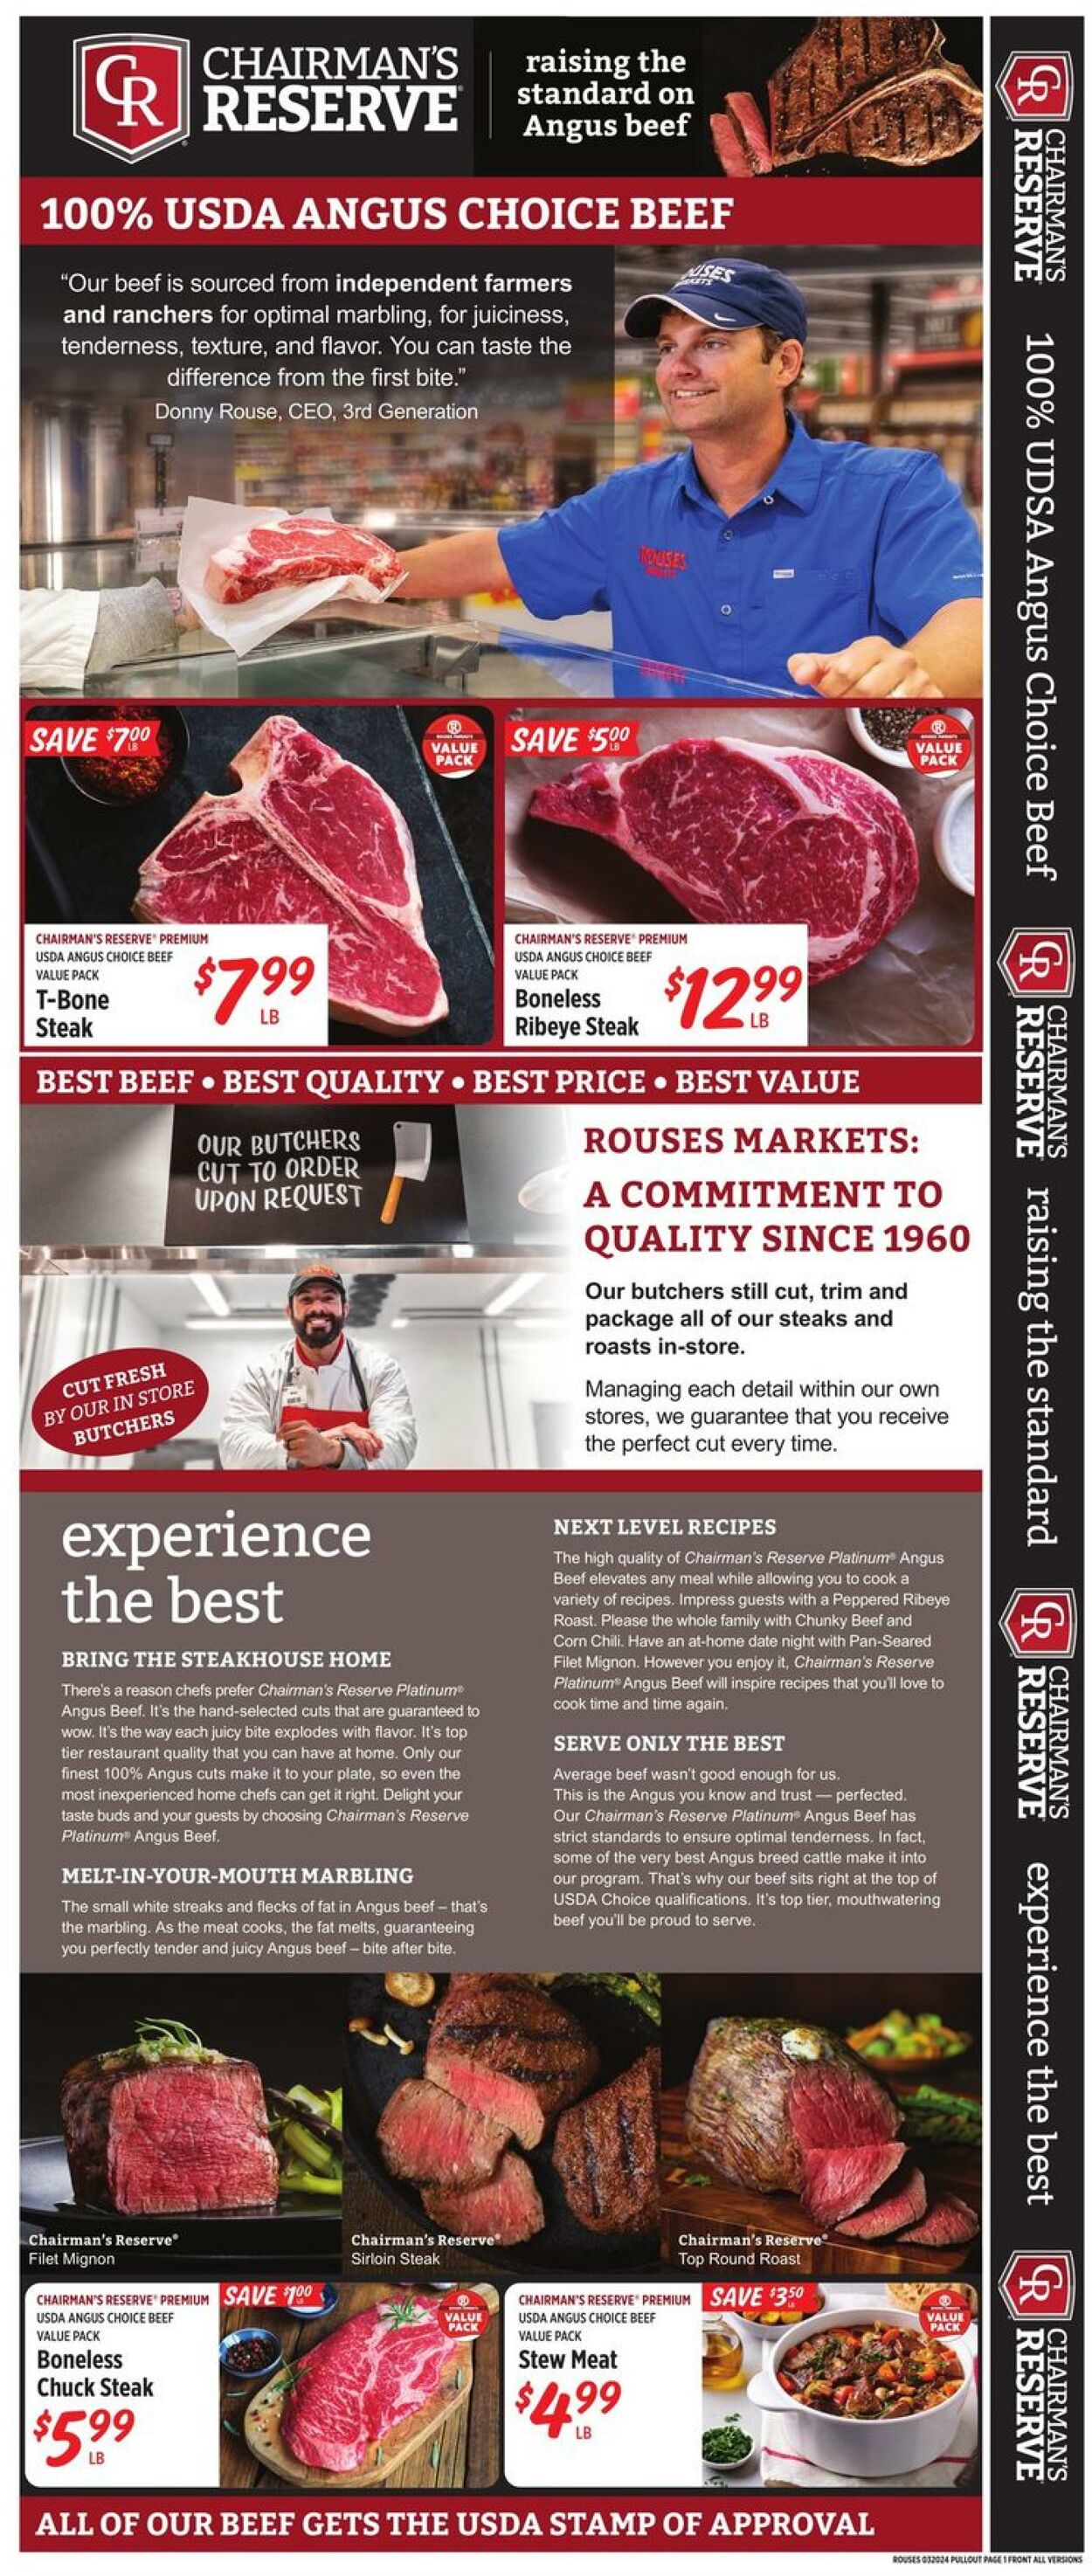 Weekly ad Rouses 03/20/2024 - 03/27/2024